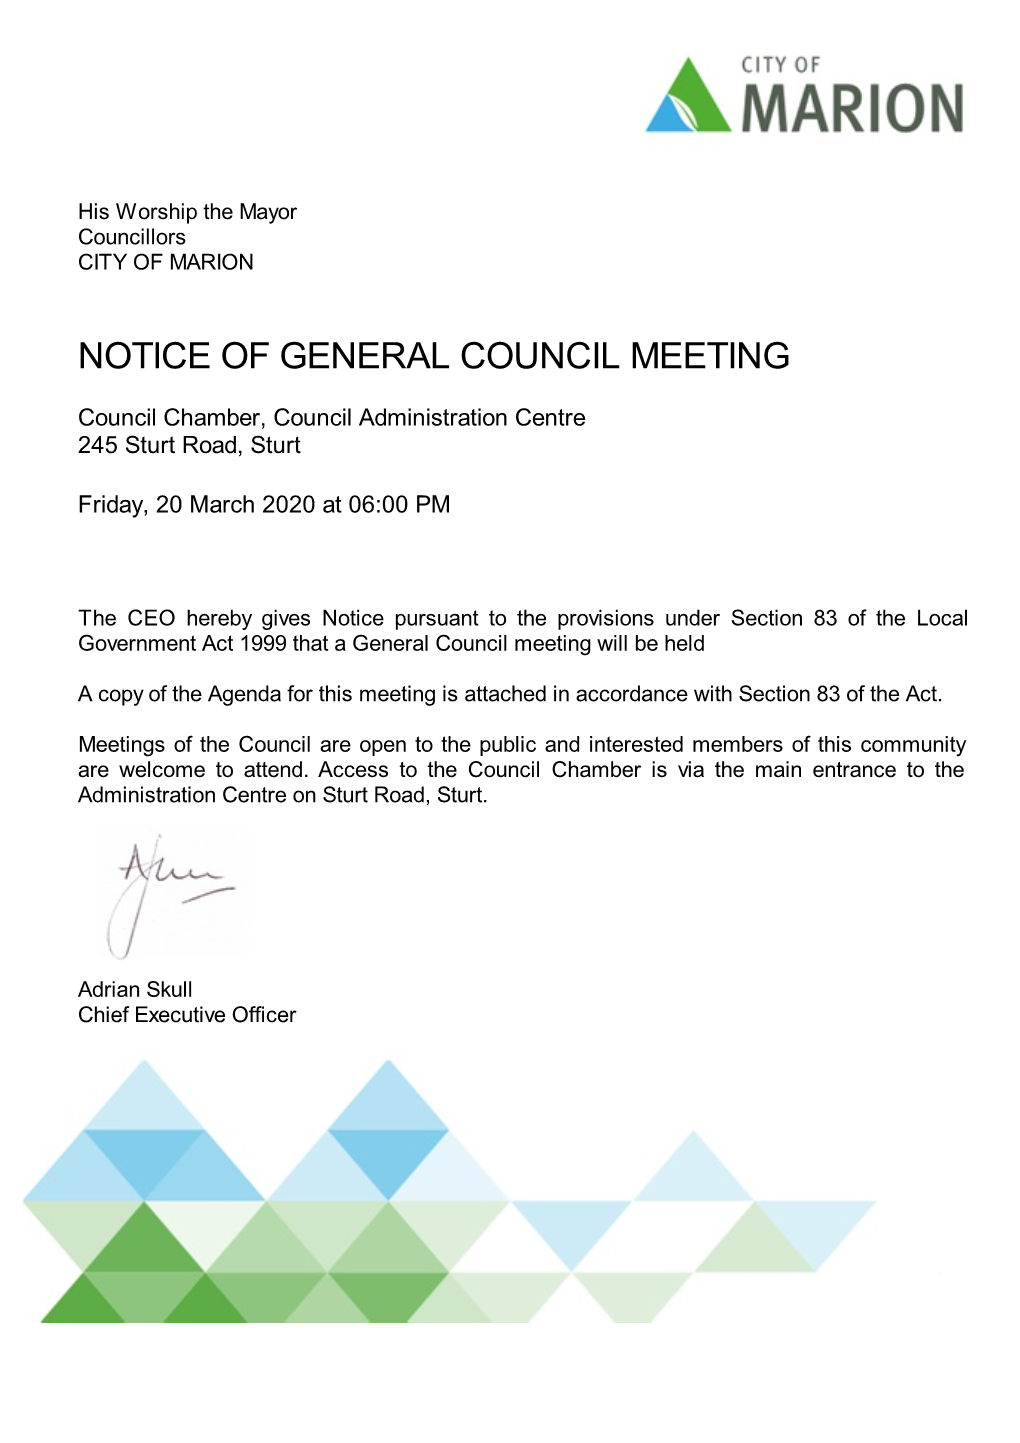 Notice of General Council Meeting